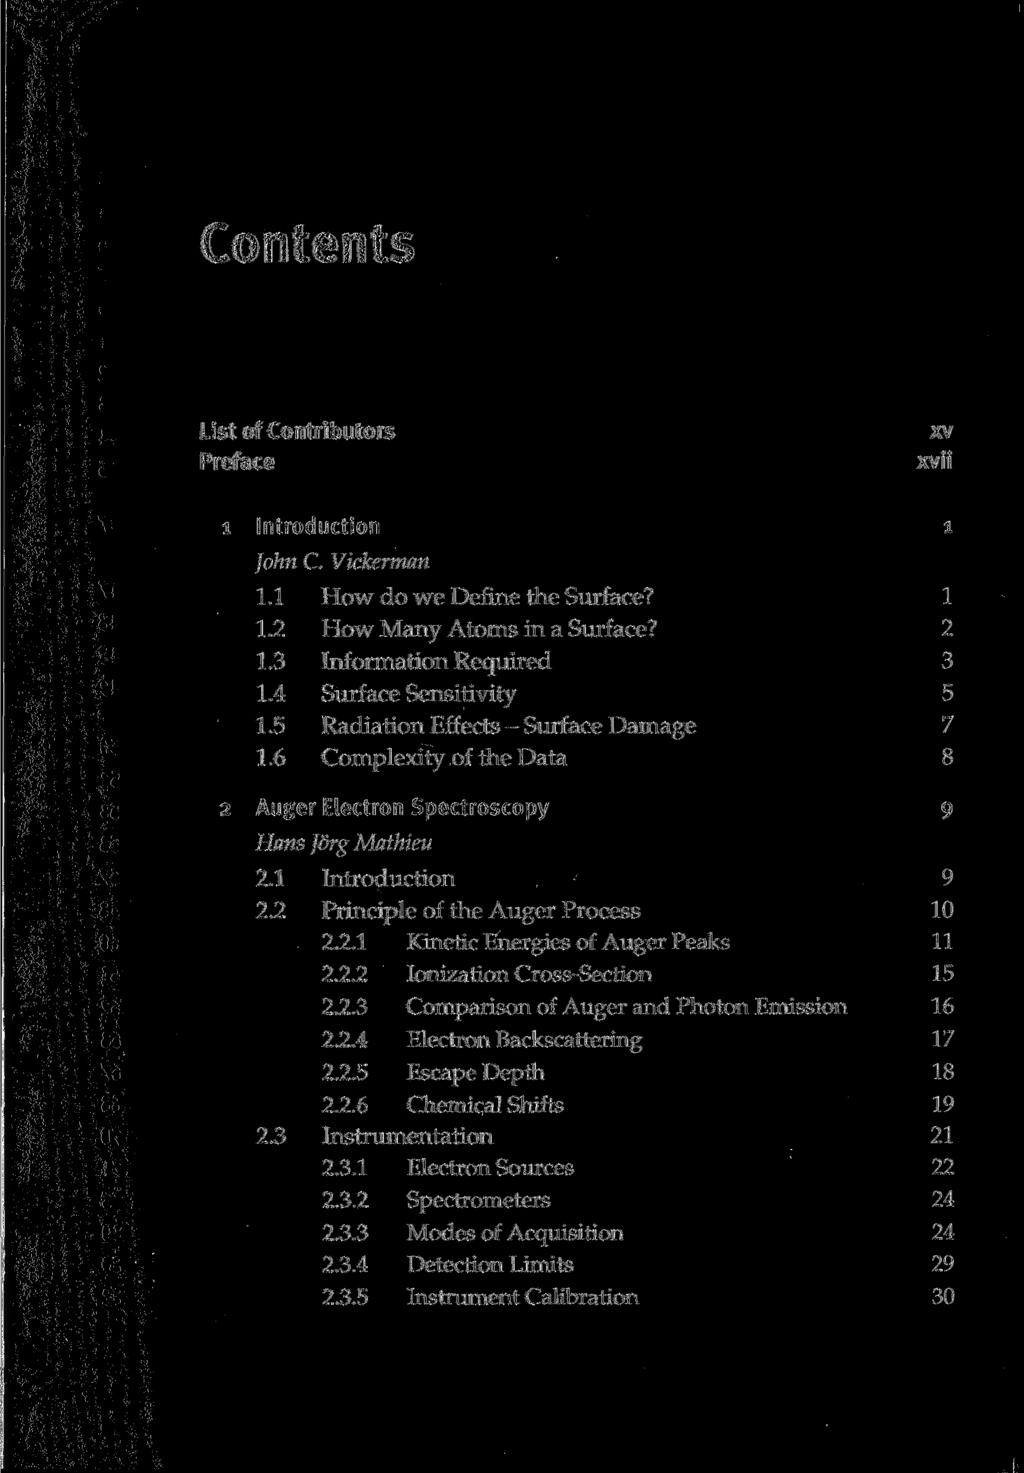 Contents List of Contributors Preface xv xvii 1 Introduction l John C. Vickerman 1.1 How do we Define the Surface? 1 1.2 How Many Atoms in a Surface? 2 1.3 Information Required 3 1.